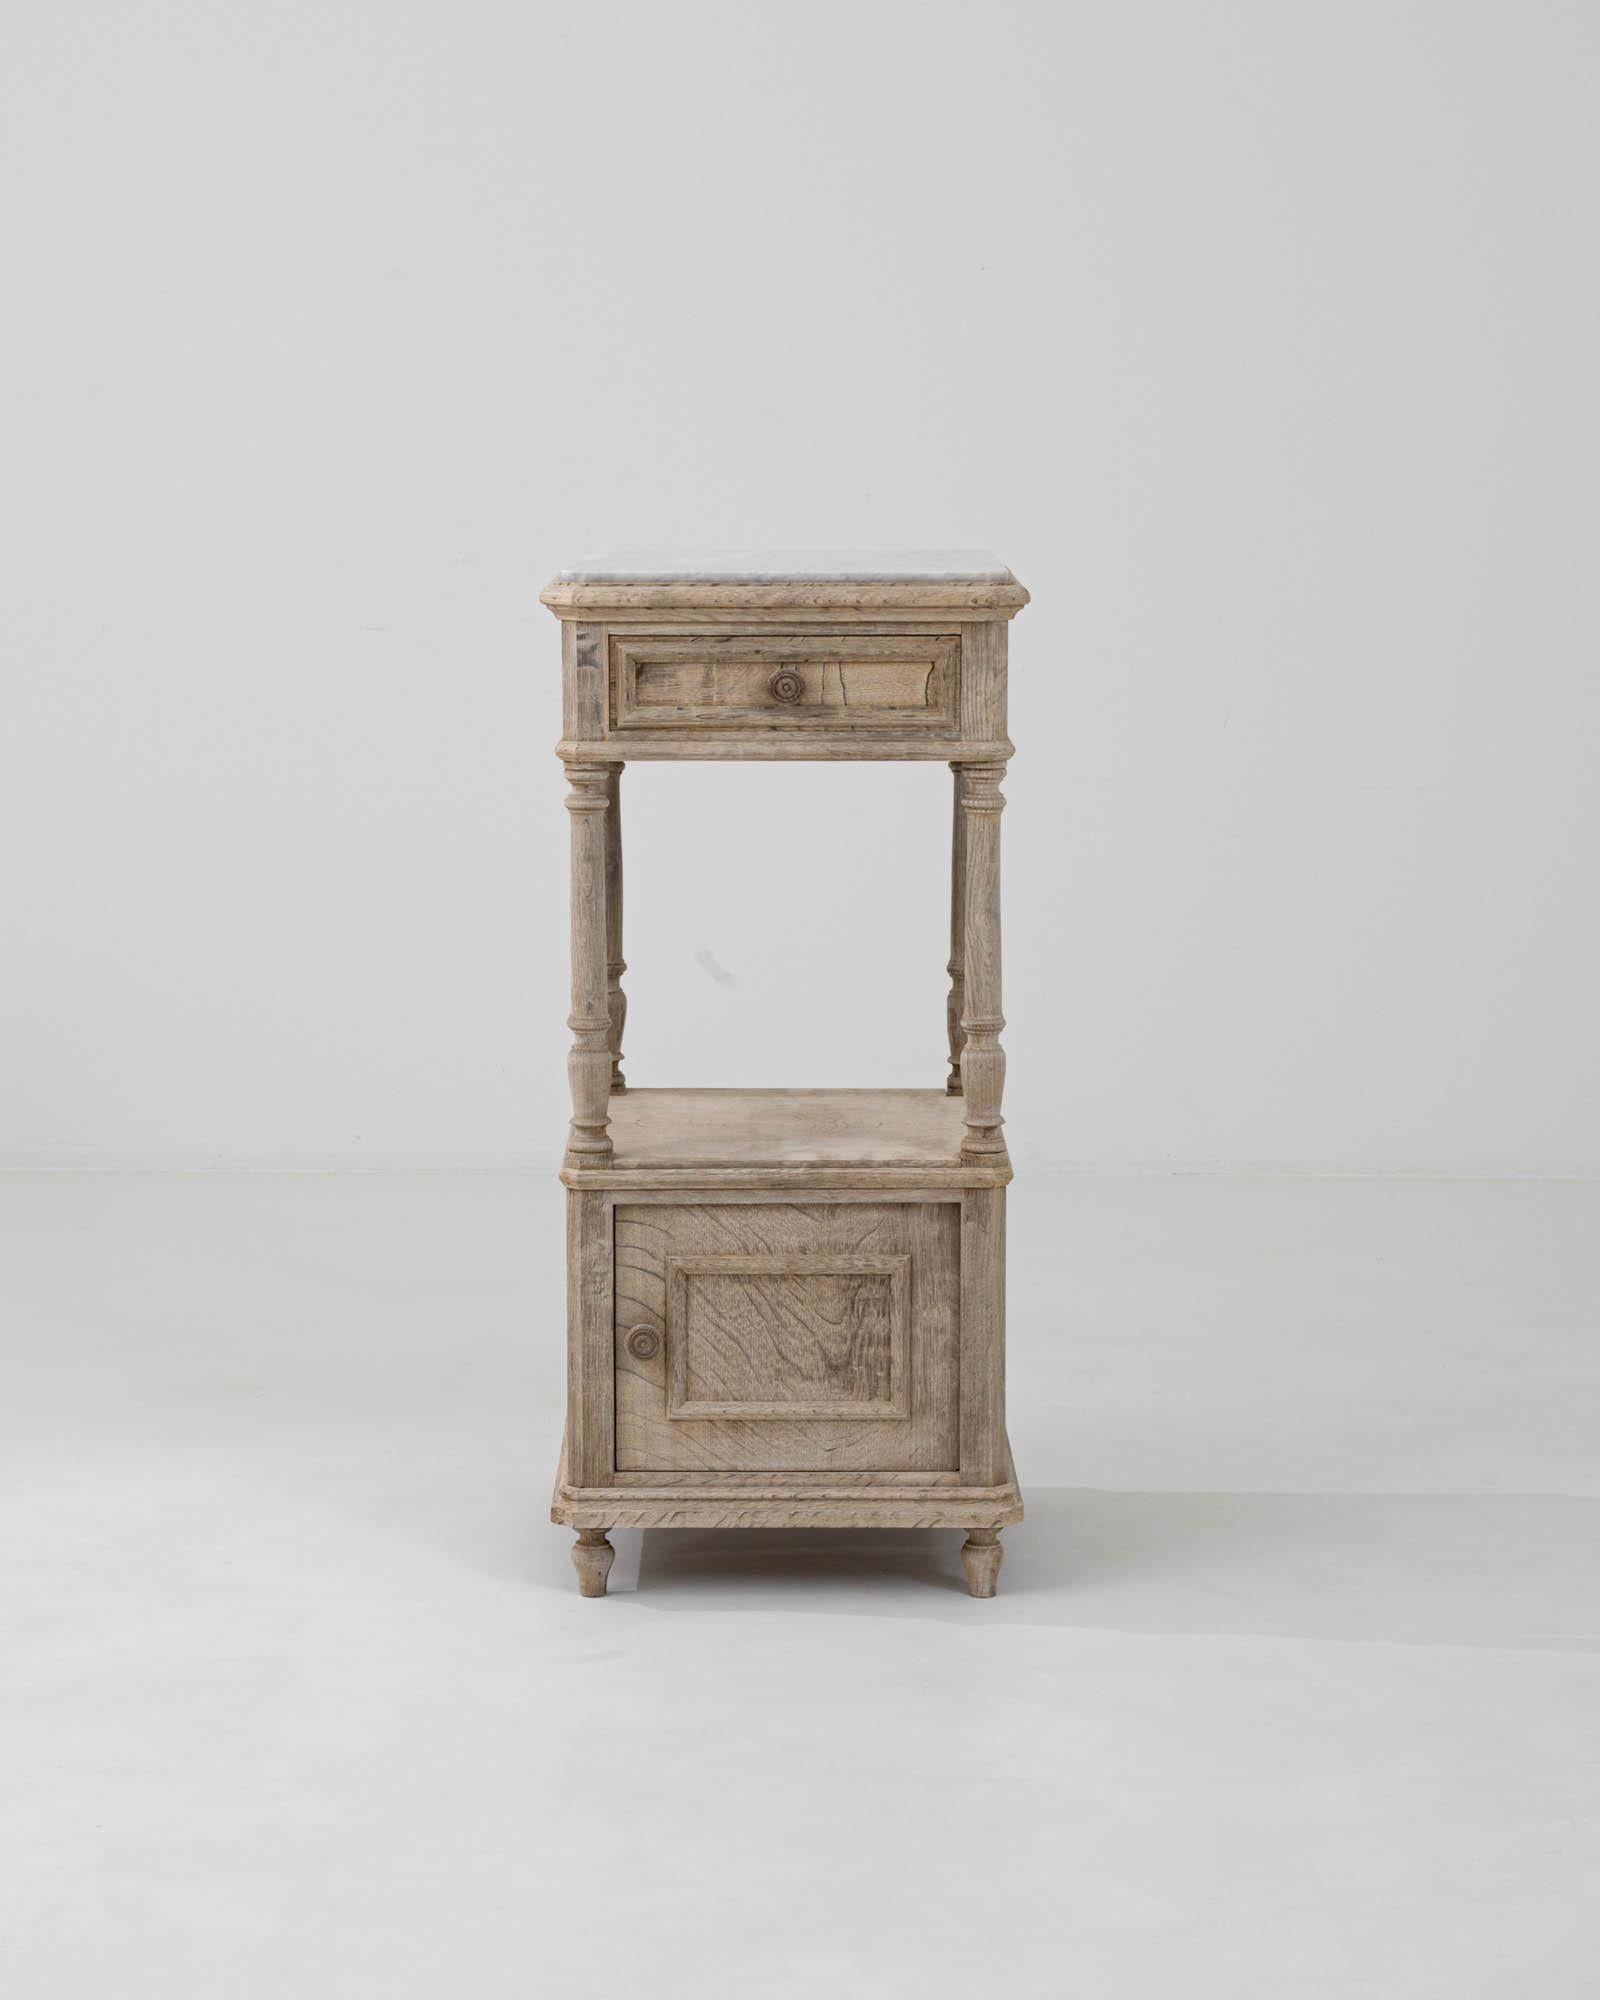 Embrace the quaint charm and refined simplicity of the early 1900s with this exquisite French Bleached Oak Bedside Table, crowned with a timeless marble top. The subtle, sun-kissed hue of the bleached oak exudes a serene, lived-in elegance,